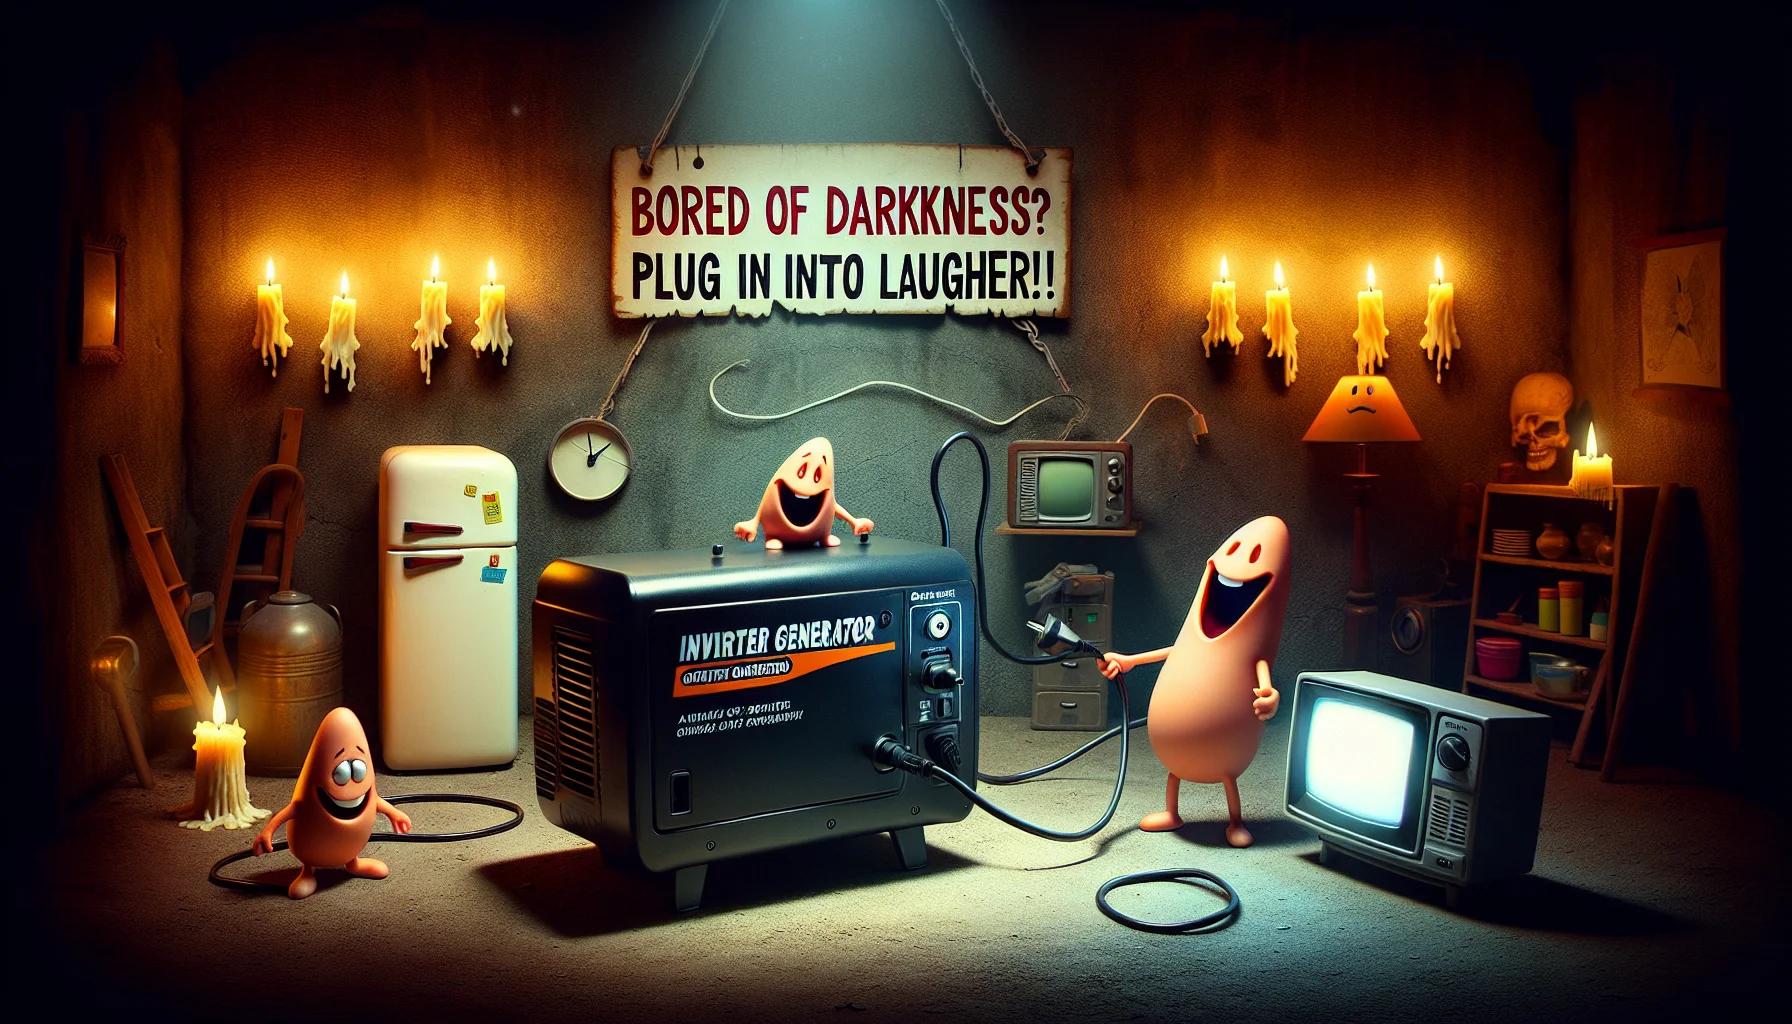 Create an imaginative scene depicting a peculiar situation. An inverter generator akin to the style of a Pulsar 4500 Inverter Generator is humorously using its power. In the background, a comic signage quotes 'Bored of darkness? Plug into laughter!' The generator, curiously personified, is sending electricity towards household appliances-like a refrigerator, TV, and a lamp- that are animate, gleefully bouncing around. The appliances appear delightfully overjoyed, illuminated in the otherwise eerie, candle-lit surroundings. The scene creatively encourages the fun side of generating electricity.